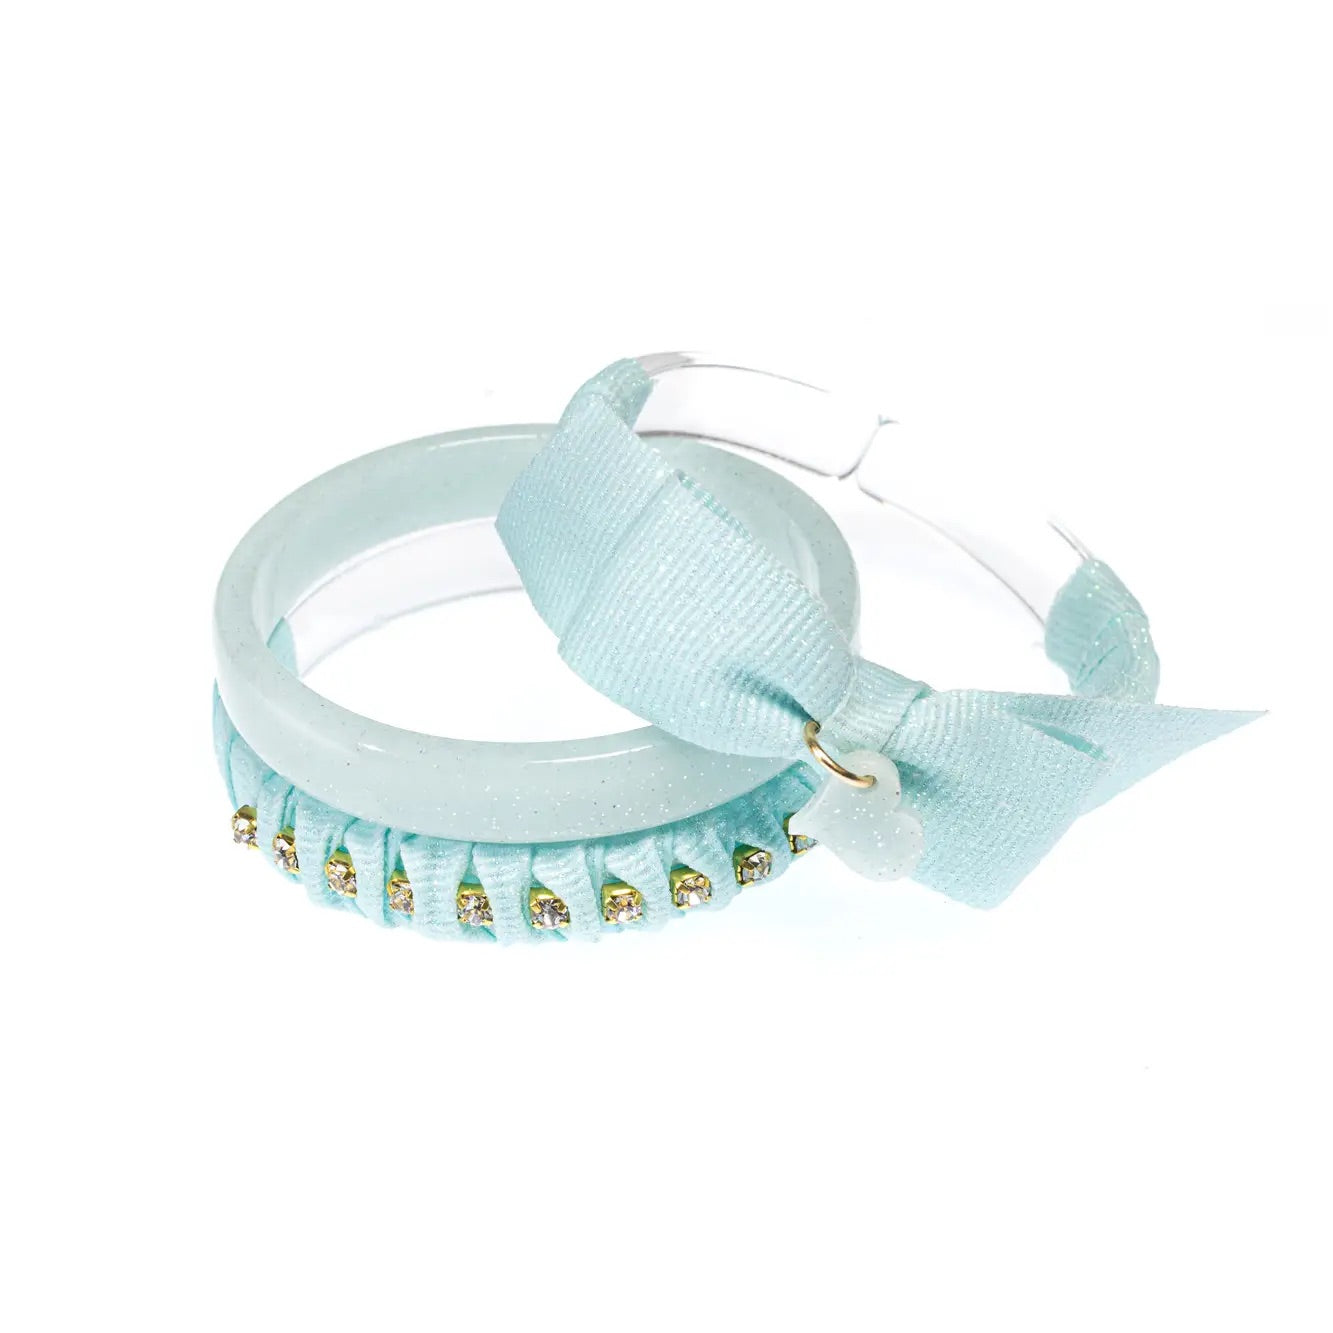 Lilies & Roses Single Fancy Mint Bangle Bracelet - Mint Fabric Bow / Solid Mint Sparkle / Mint Fabric with Gold